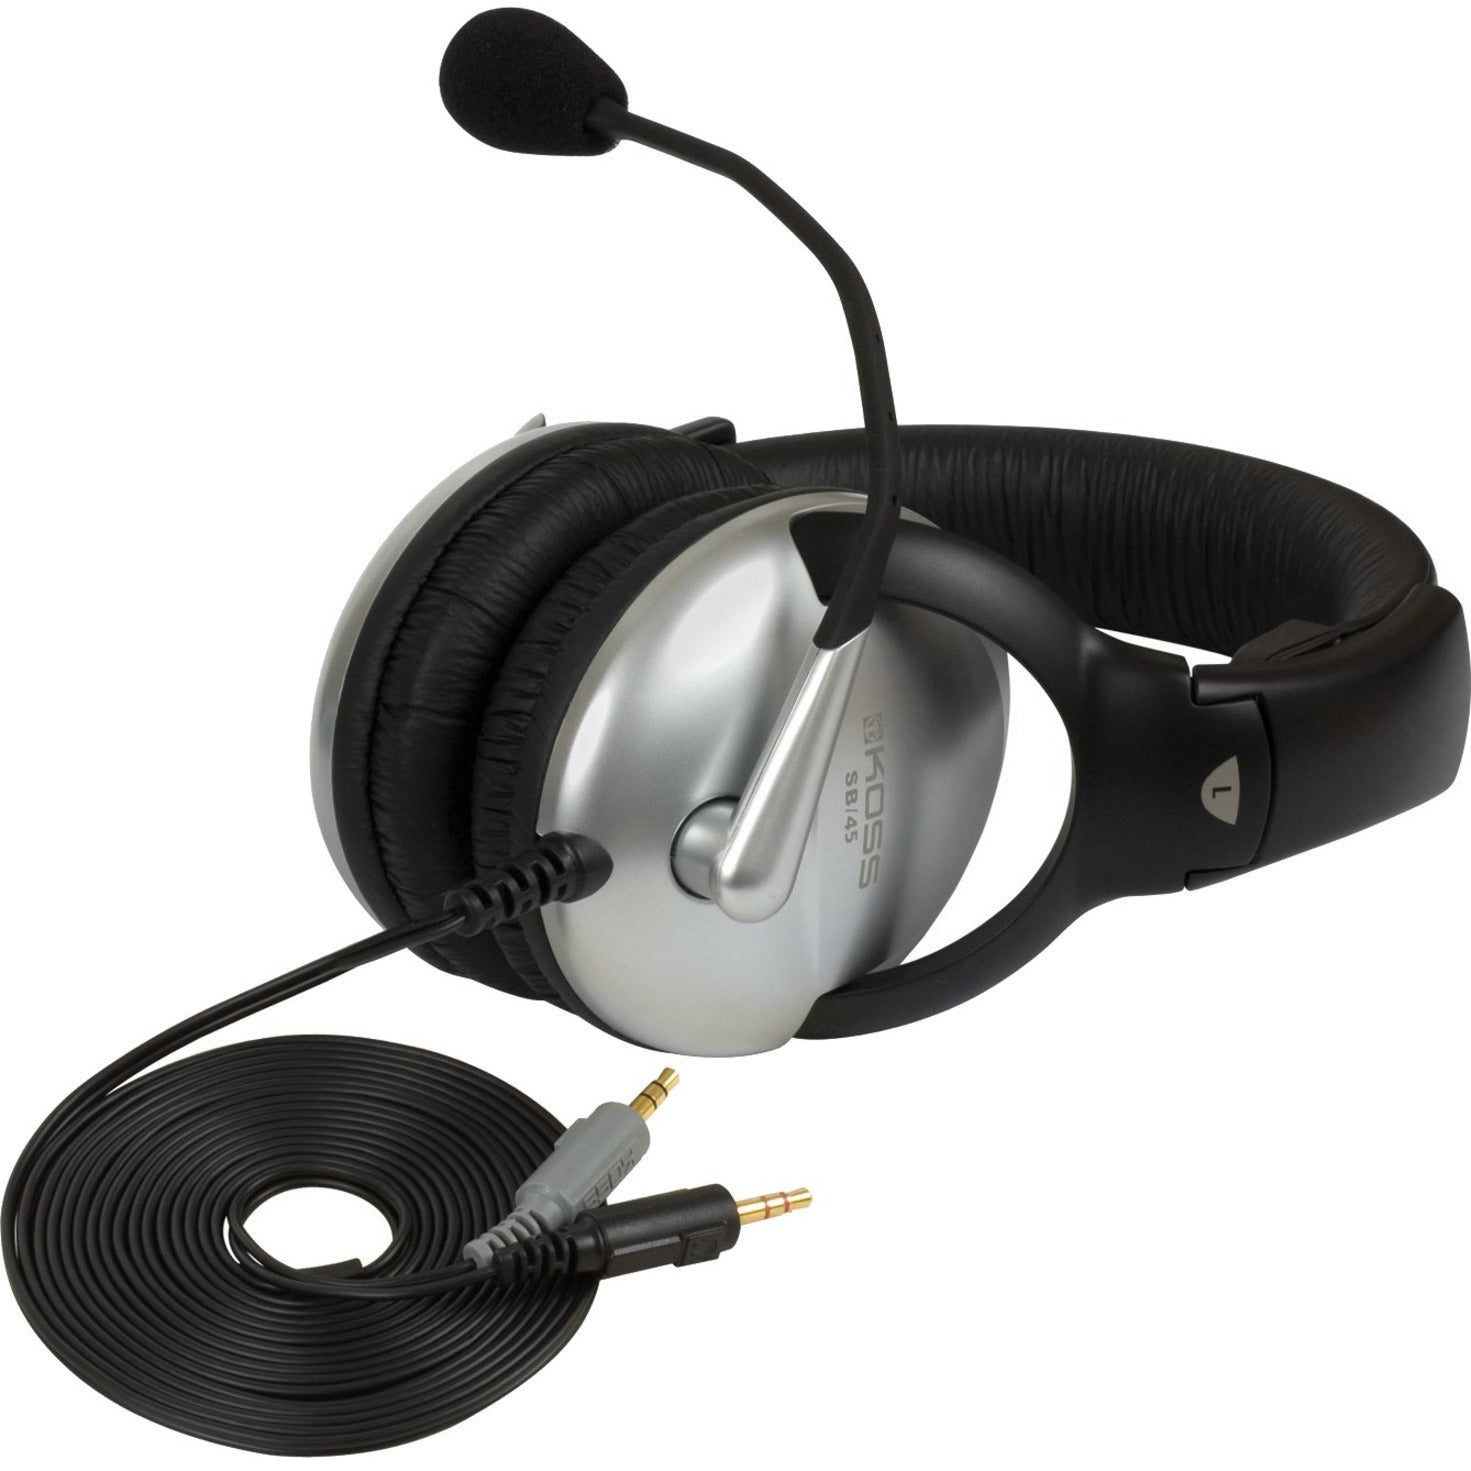 Koss SB45 USB Communication Headsets, Over-the-head Binaural Headset with Boom Microphone, Collapsible, Noise Reduction